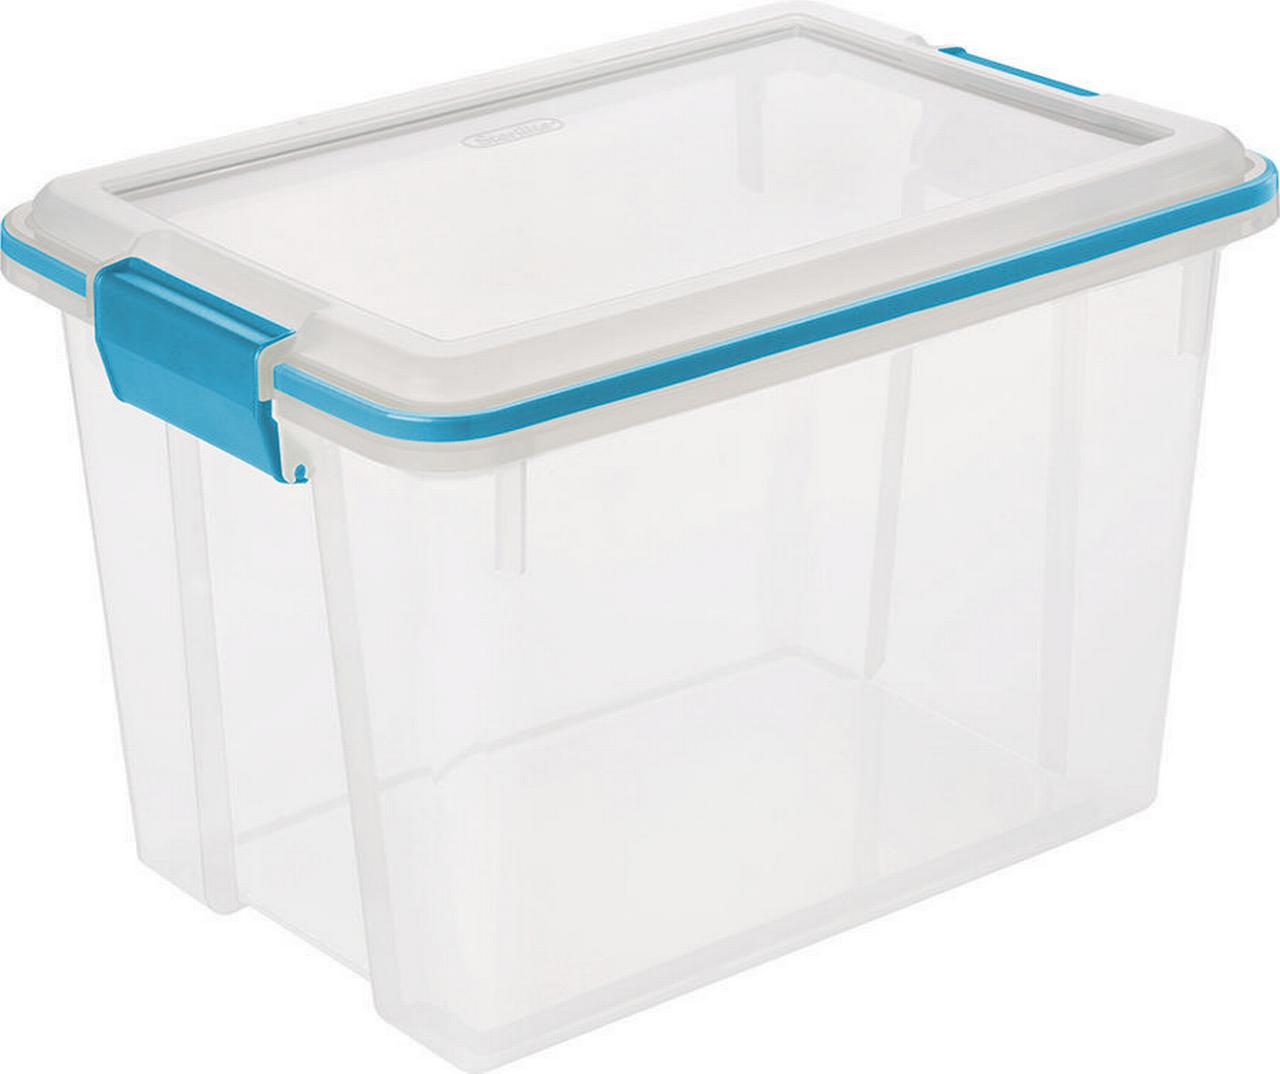 Sterilite 20 Quart Clear Gasket Box with Blue Latches & Gasket - image 3 of 9